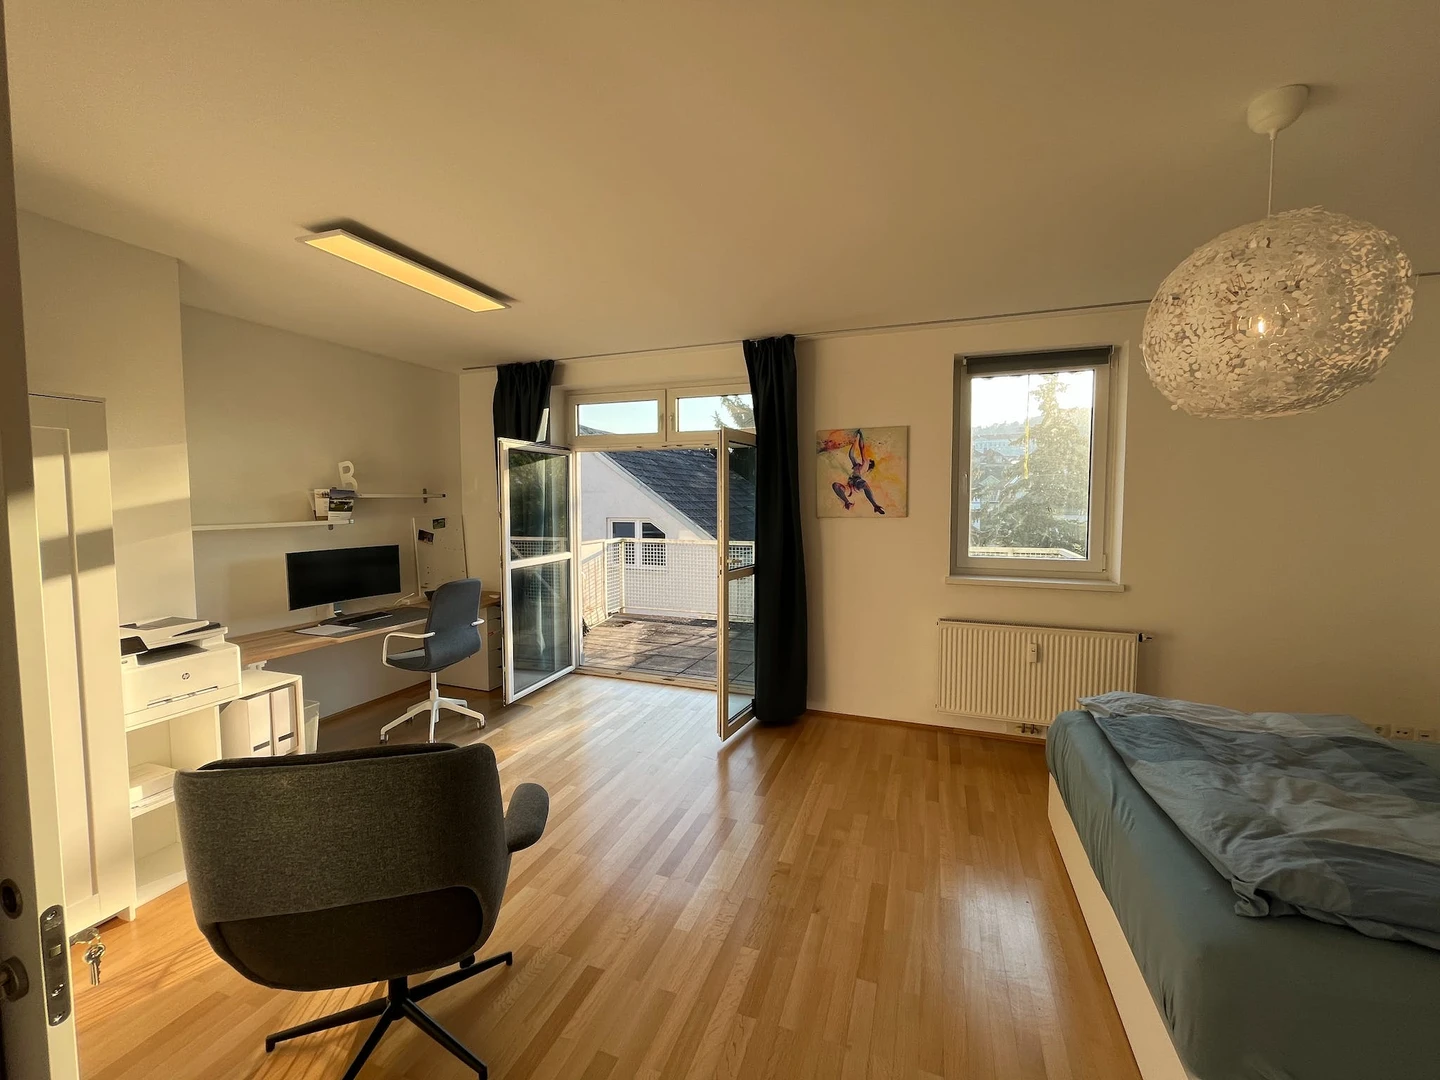 Room for rent with double bed linz